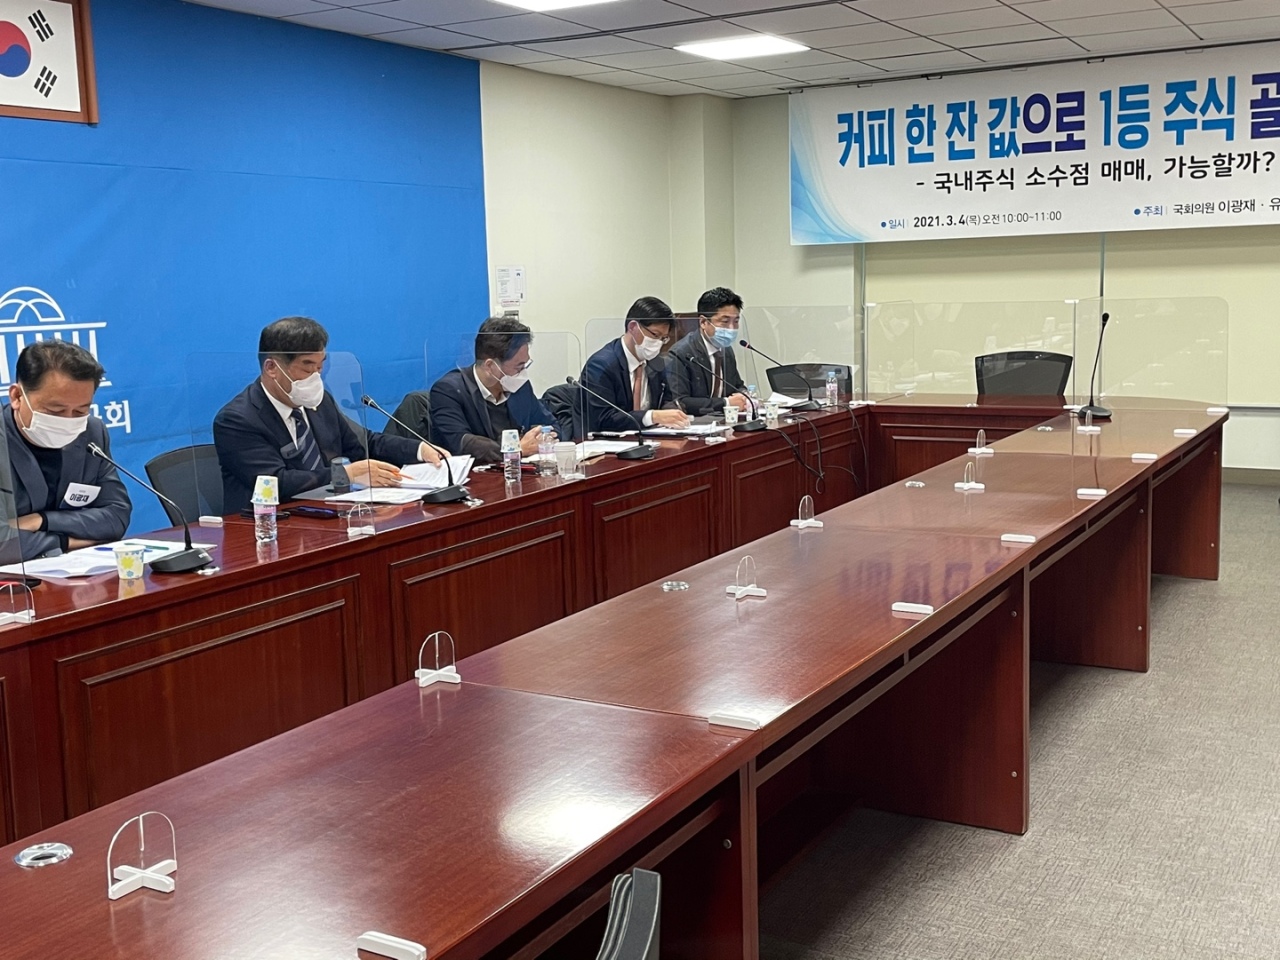 Lawmakers and industry experts gather on Thursday to discuss the introduction of fractional stock investing in South Korea. (By Park Ga-young/The Korea Herald)